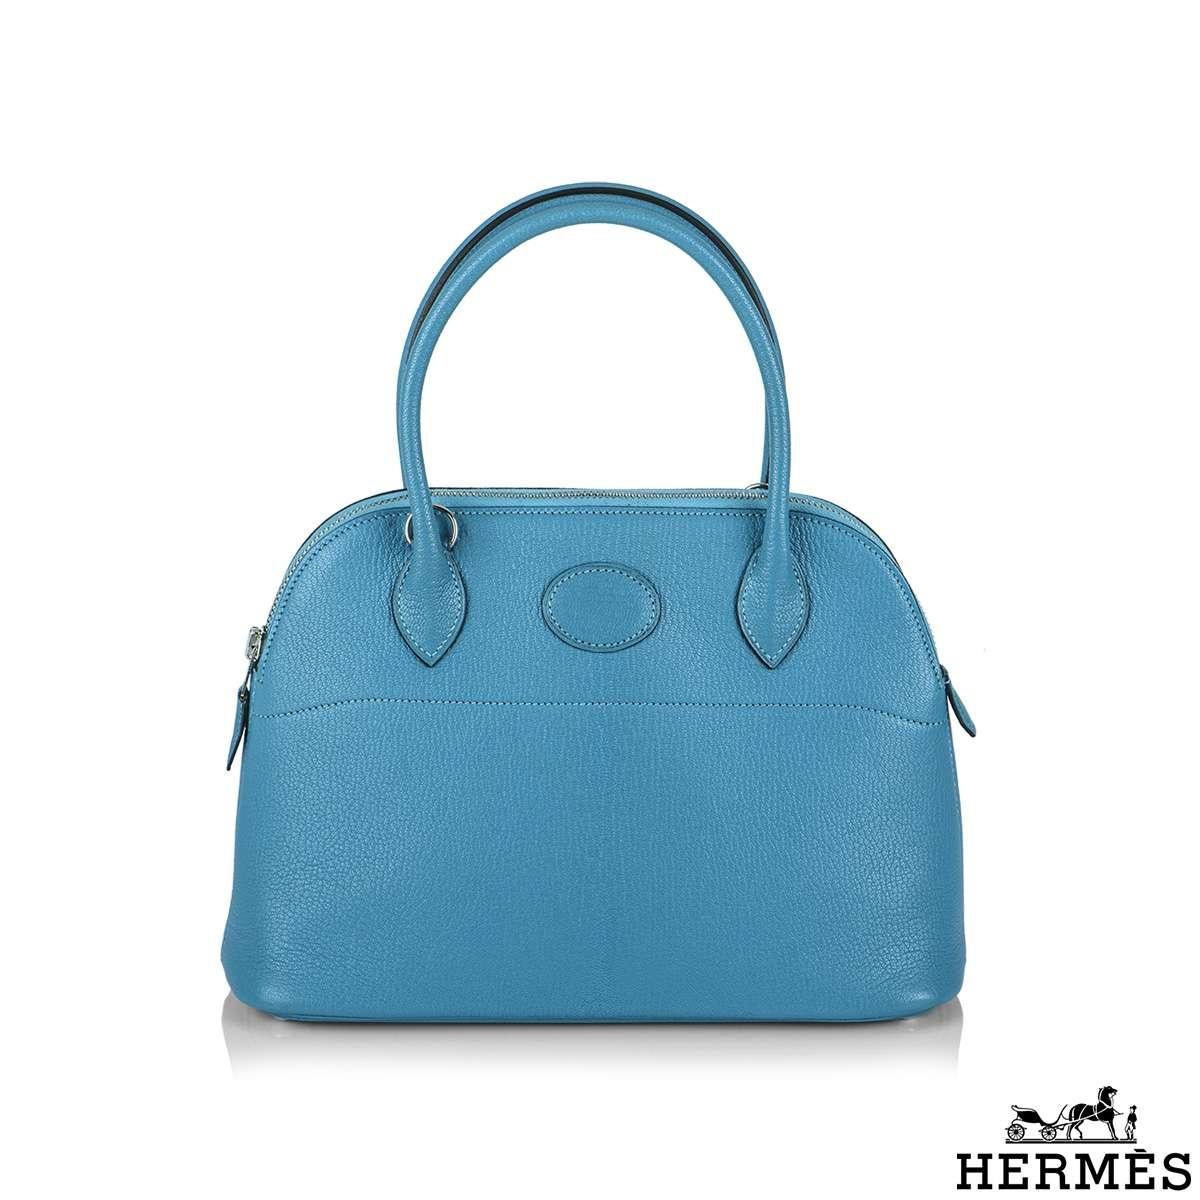 An exquisite and classic Hermès Bolide 27 bag. The exterior of this Bolide is in turquoise chevre mysore leather with tonal stitching. It features palladium hardware with two straps and front toggle closure. The interior is lined with blue lambskin